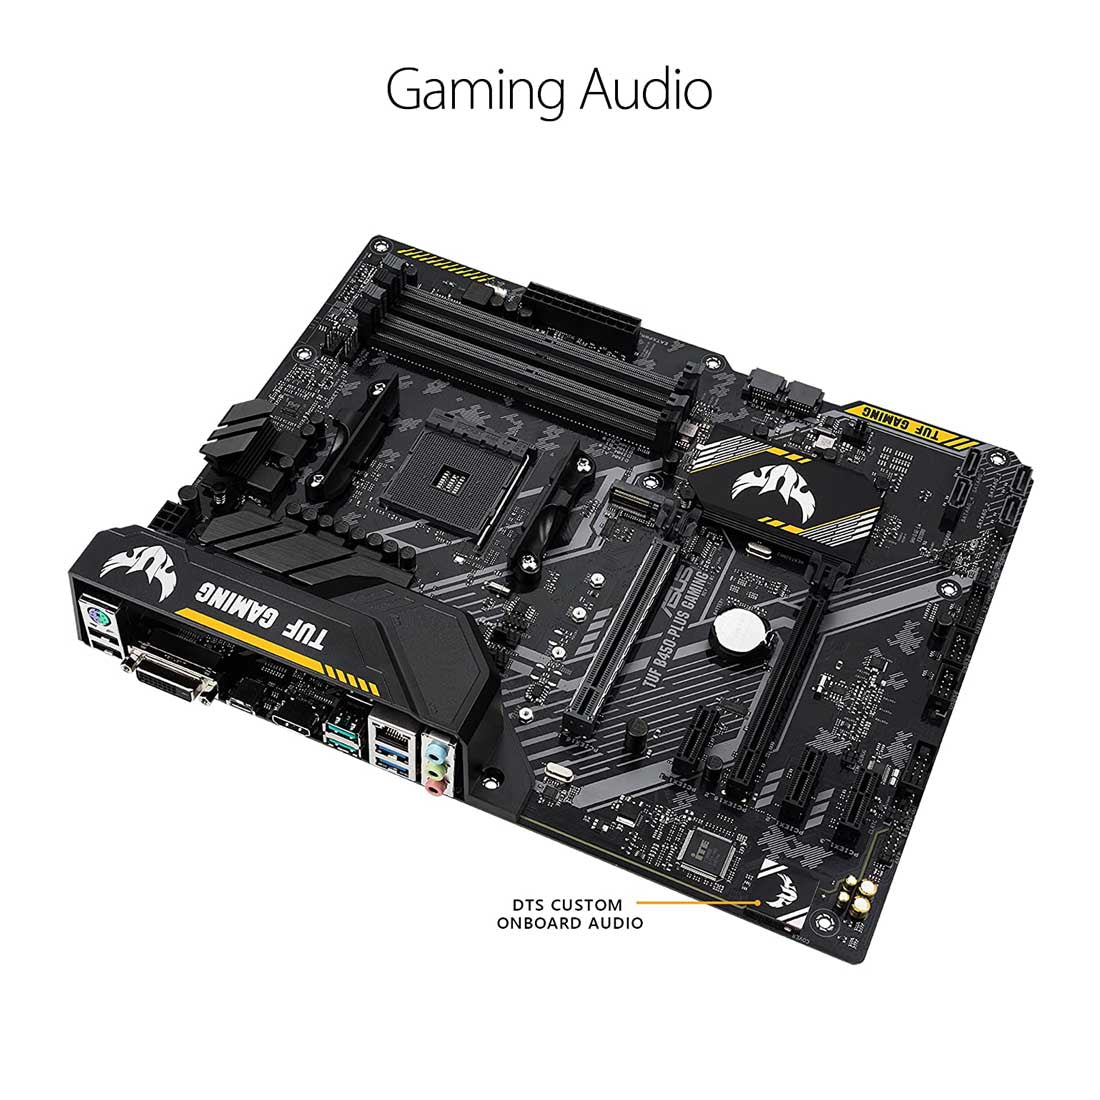 ASUS TUF B450-PLUS GAMING II AMD AM4 ATX Motherboard with M.2 Aura Sync and AMD StoreMI